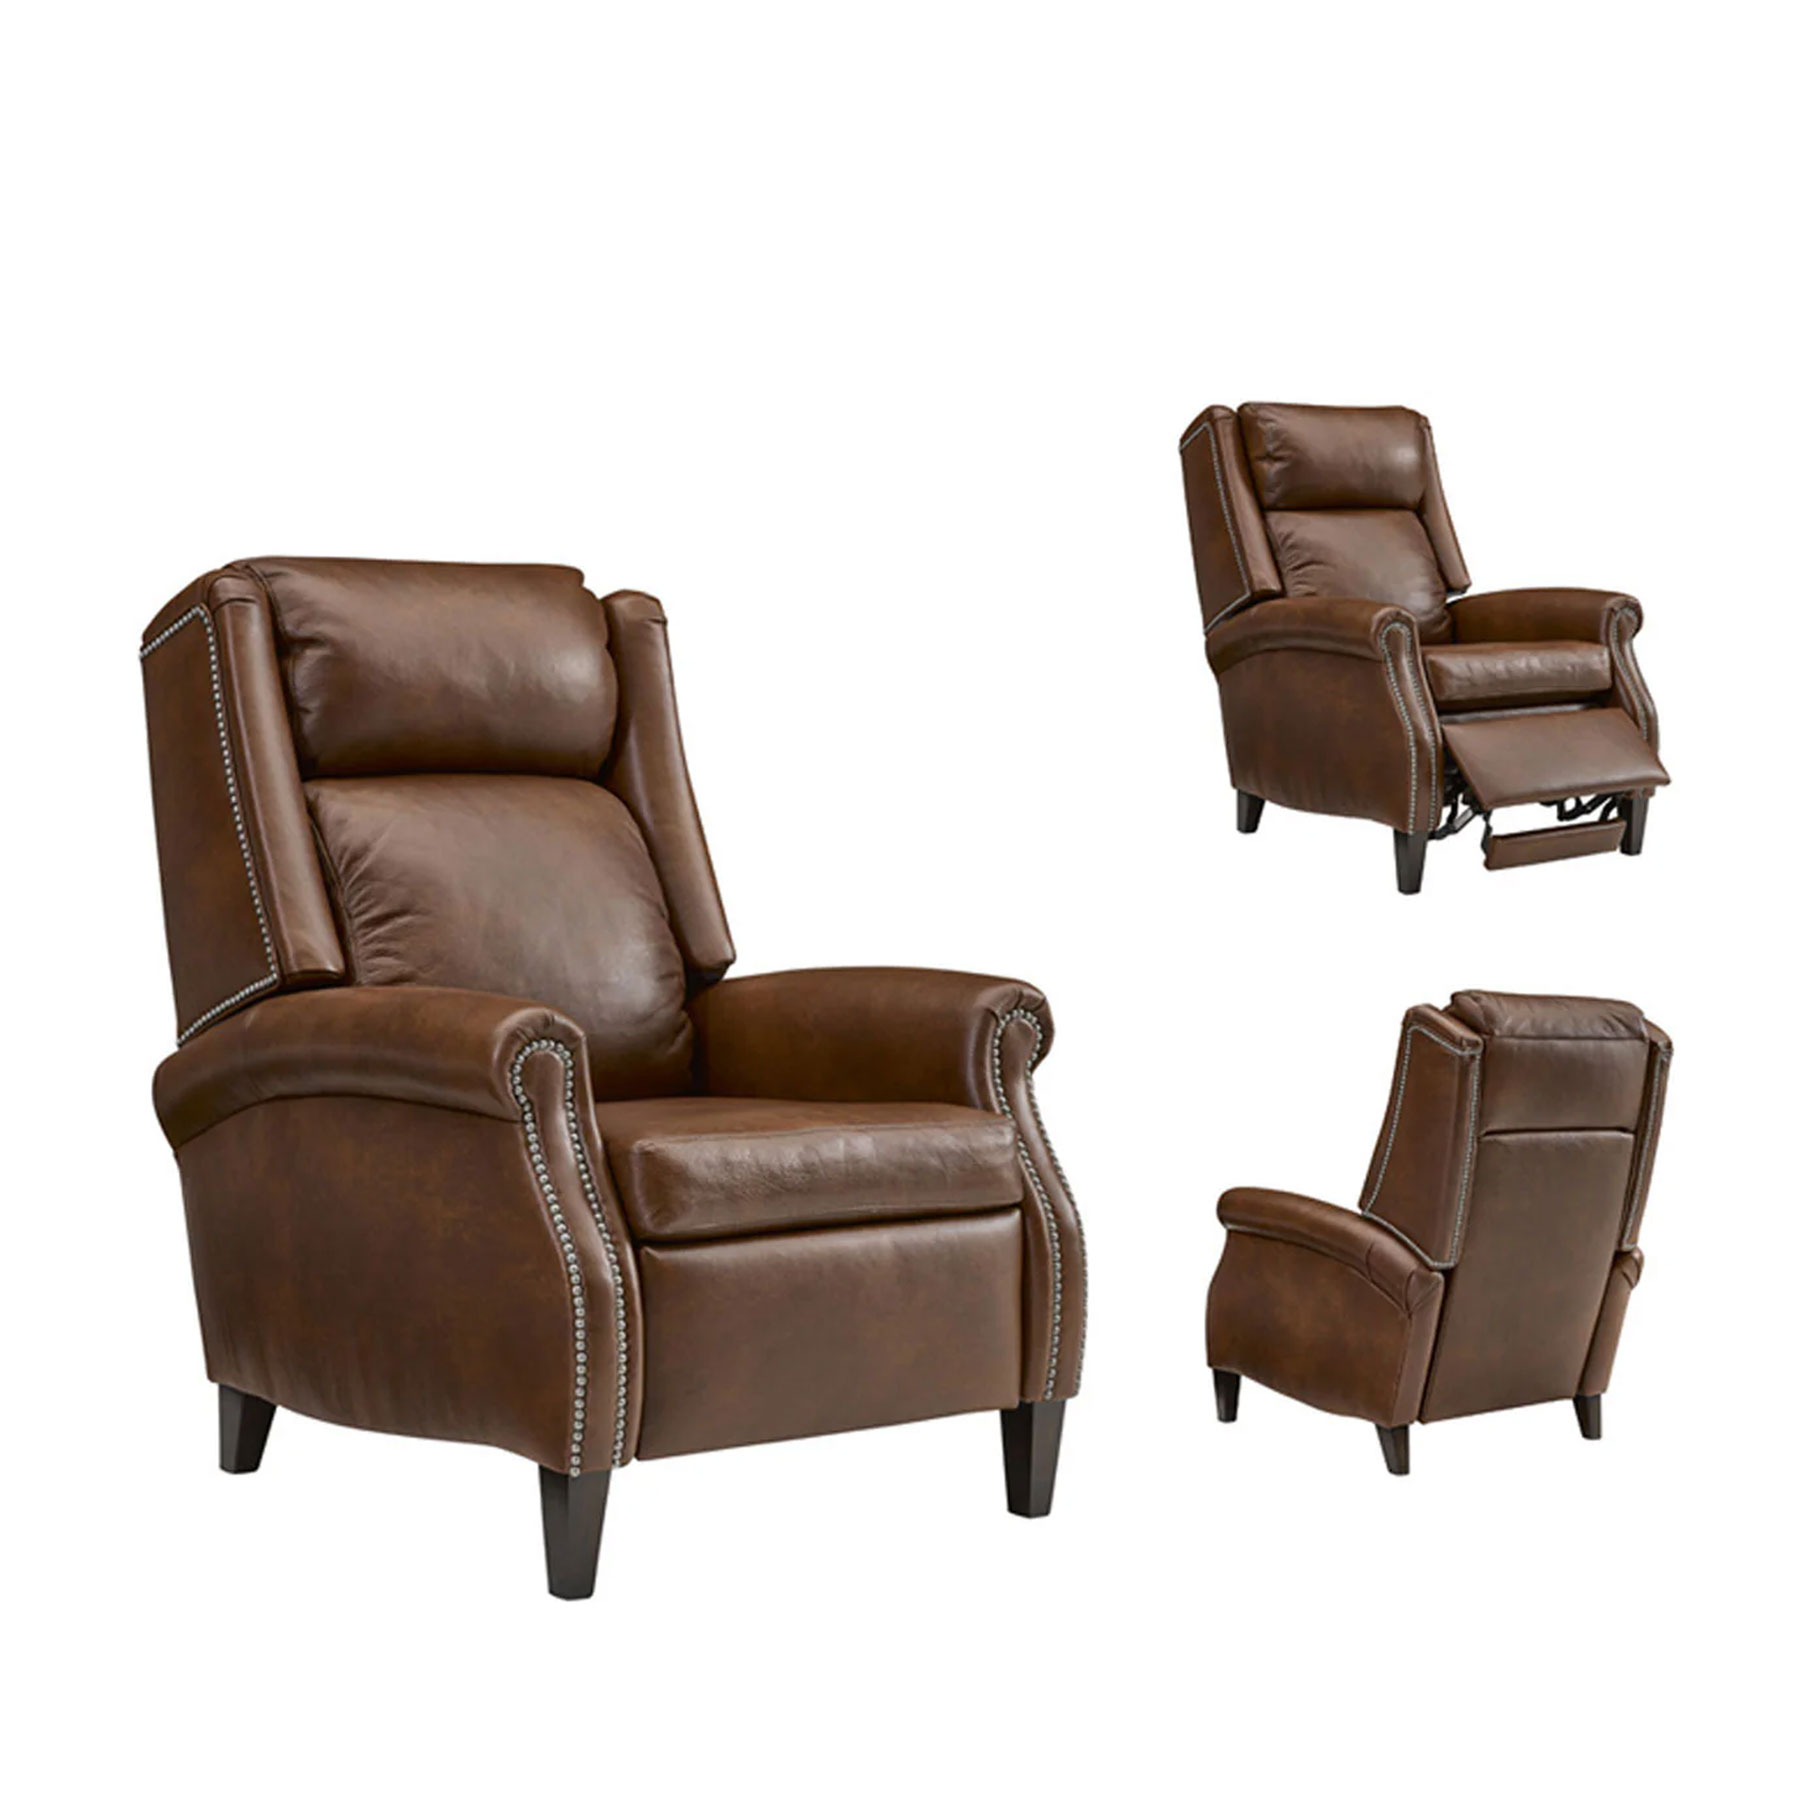 Leathercraft 537-HA7P Oasis Recliner in Hot Toddy Leather